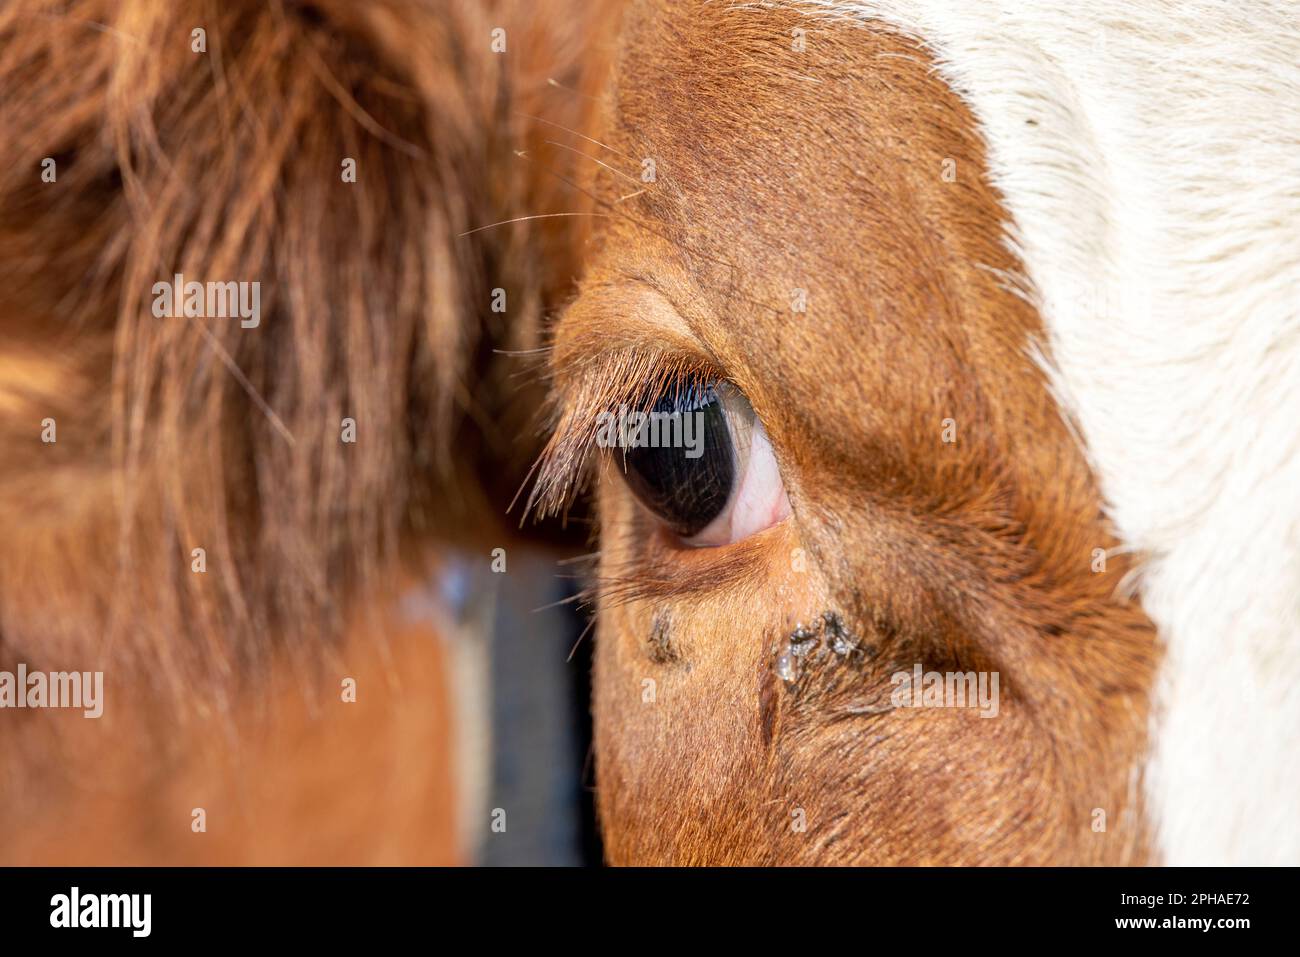 One cow eye close up, dairy red and white, looking calm and tranquil Stock Photo